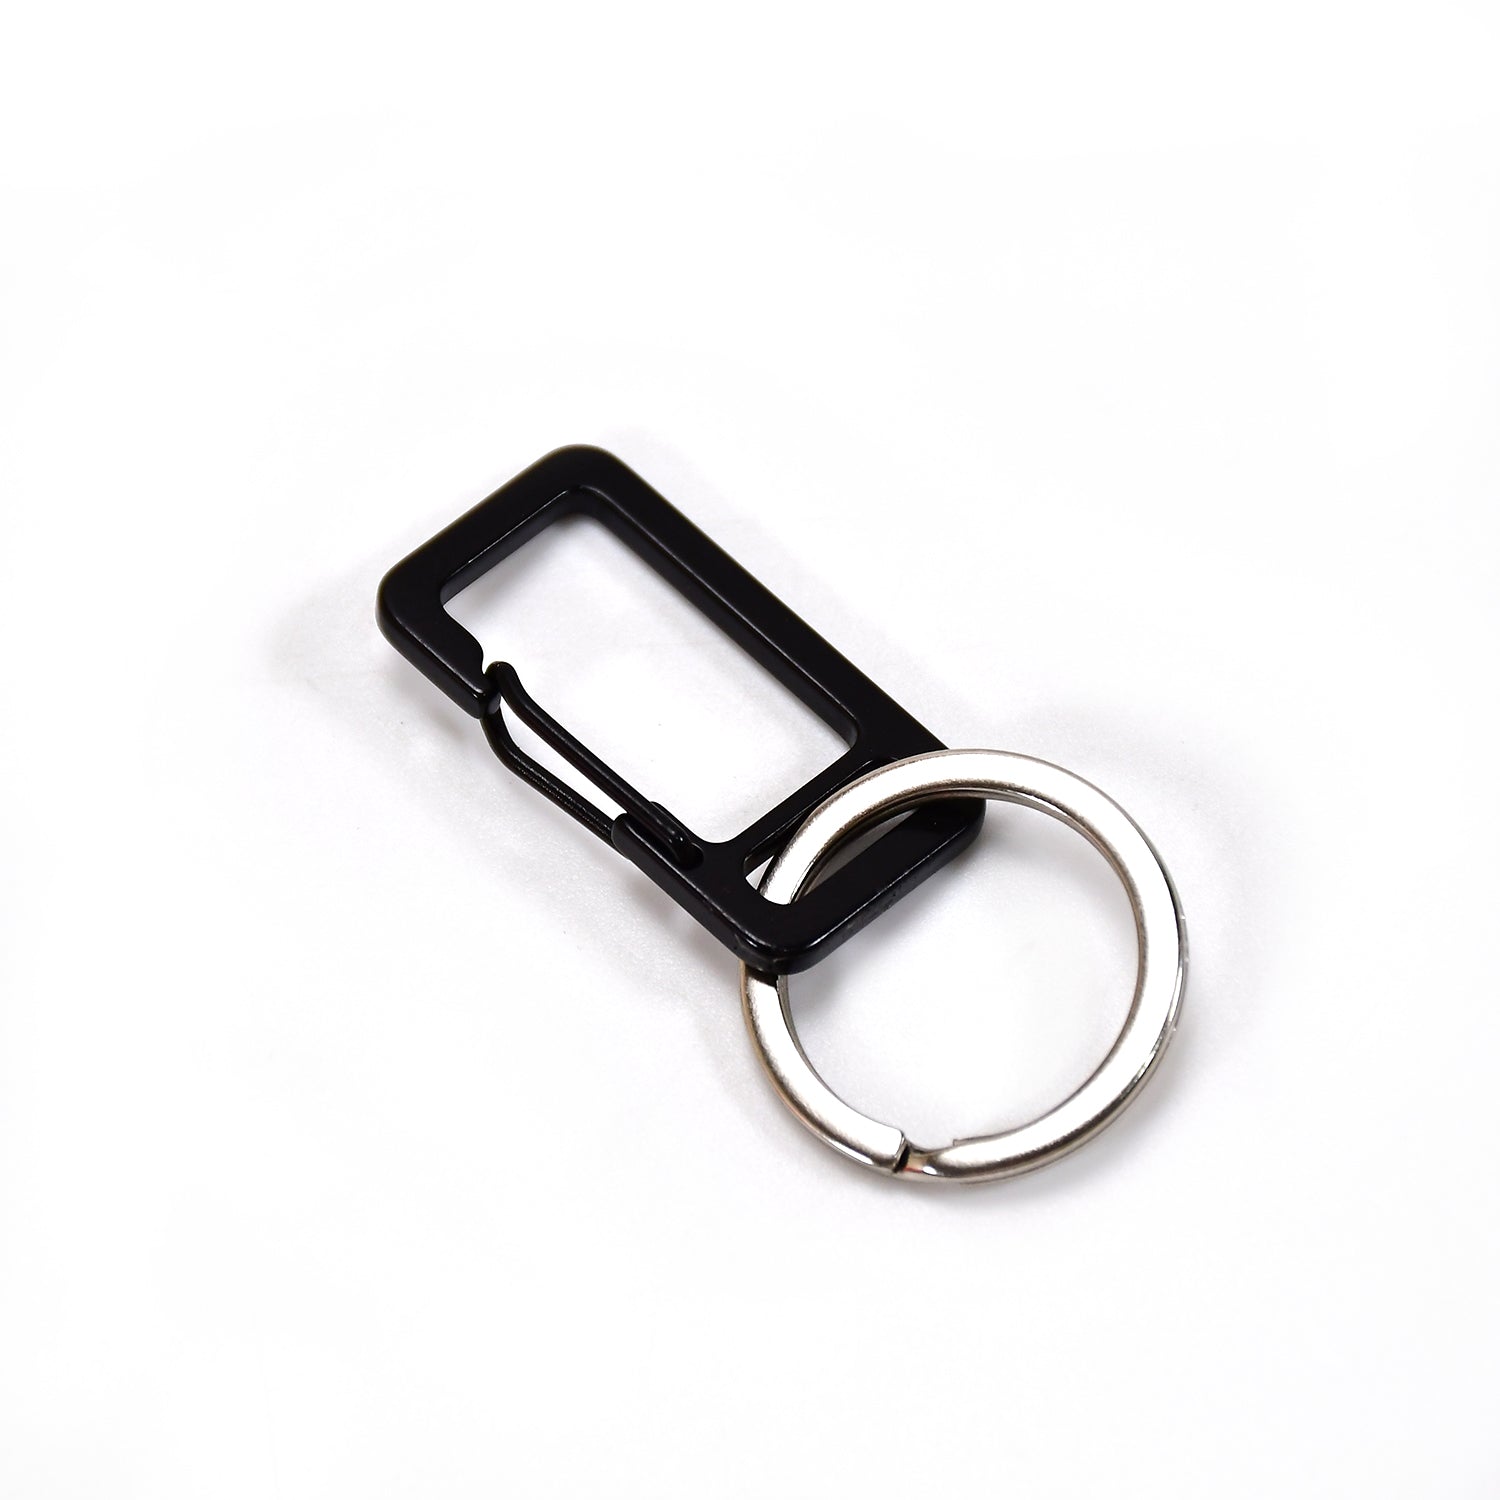 4048 Small Steel Key Ring Clip, Car Keychain Clip Key Ring Hook Keychain Holder Key Finder For Bikes Car Keychains Keychain Business Gift for Men and Women DeoDap